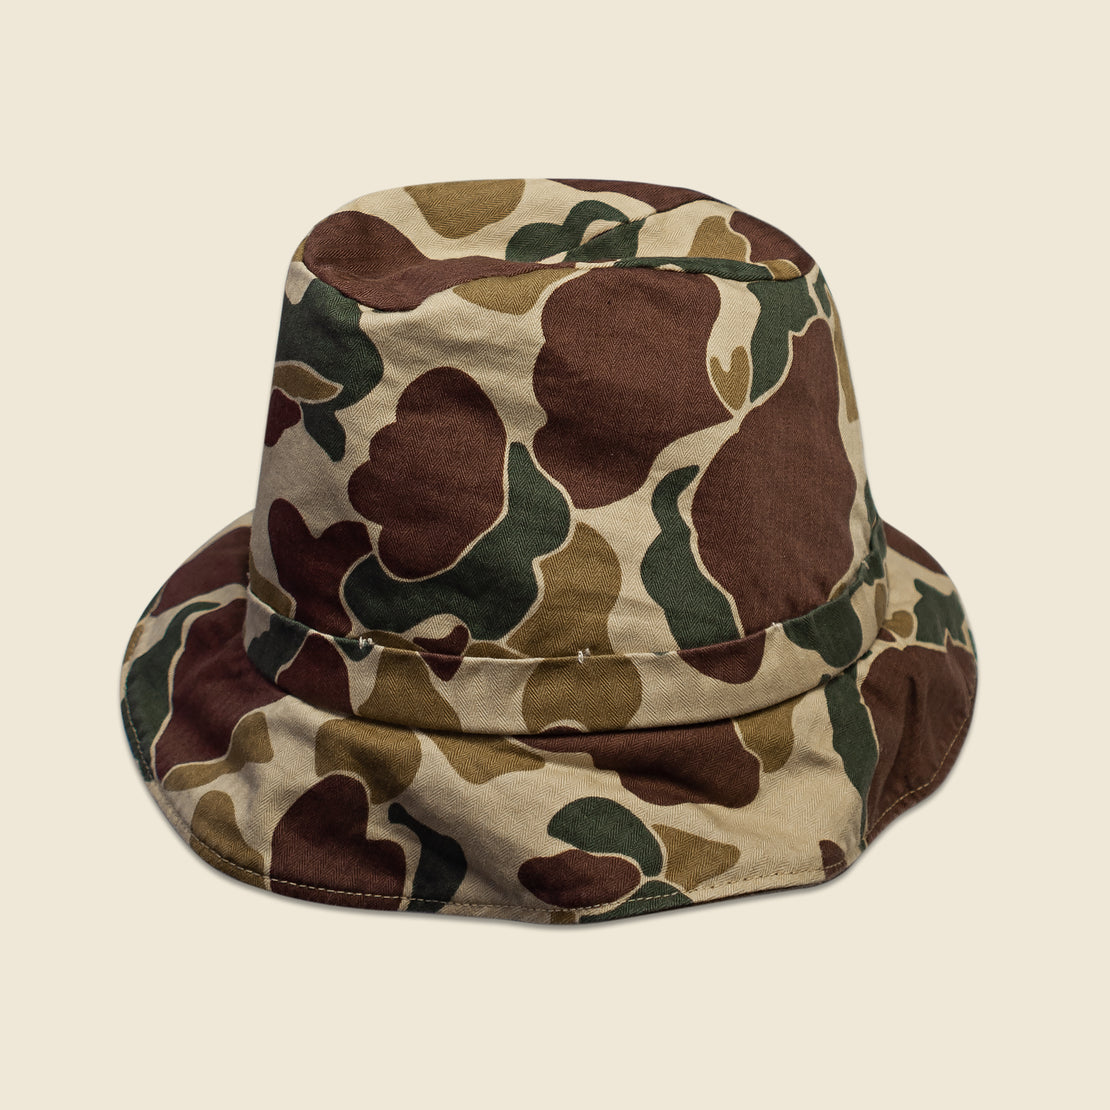 Reversible Bucket Hat - Brown/Camo - Alex Mill - STAG Provisions - Accessories - Hats